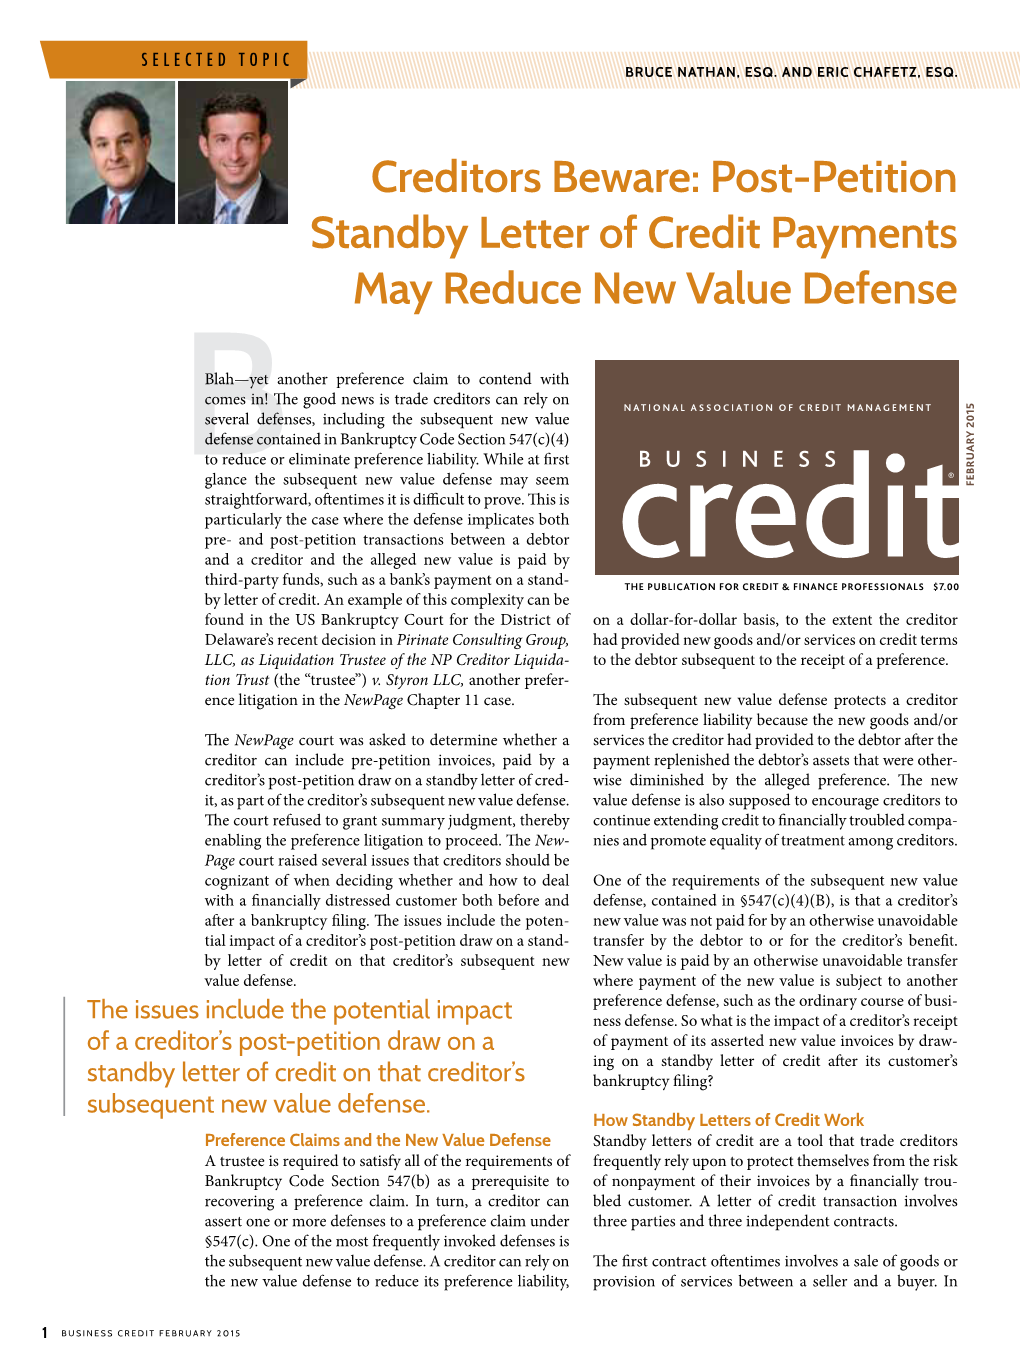 Post-Petition Standby Letter of Credit Payments May Reduce New Value Defense